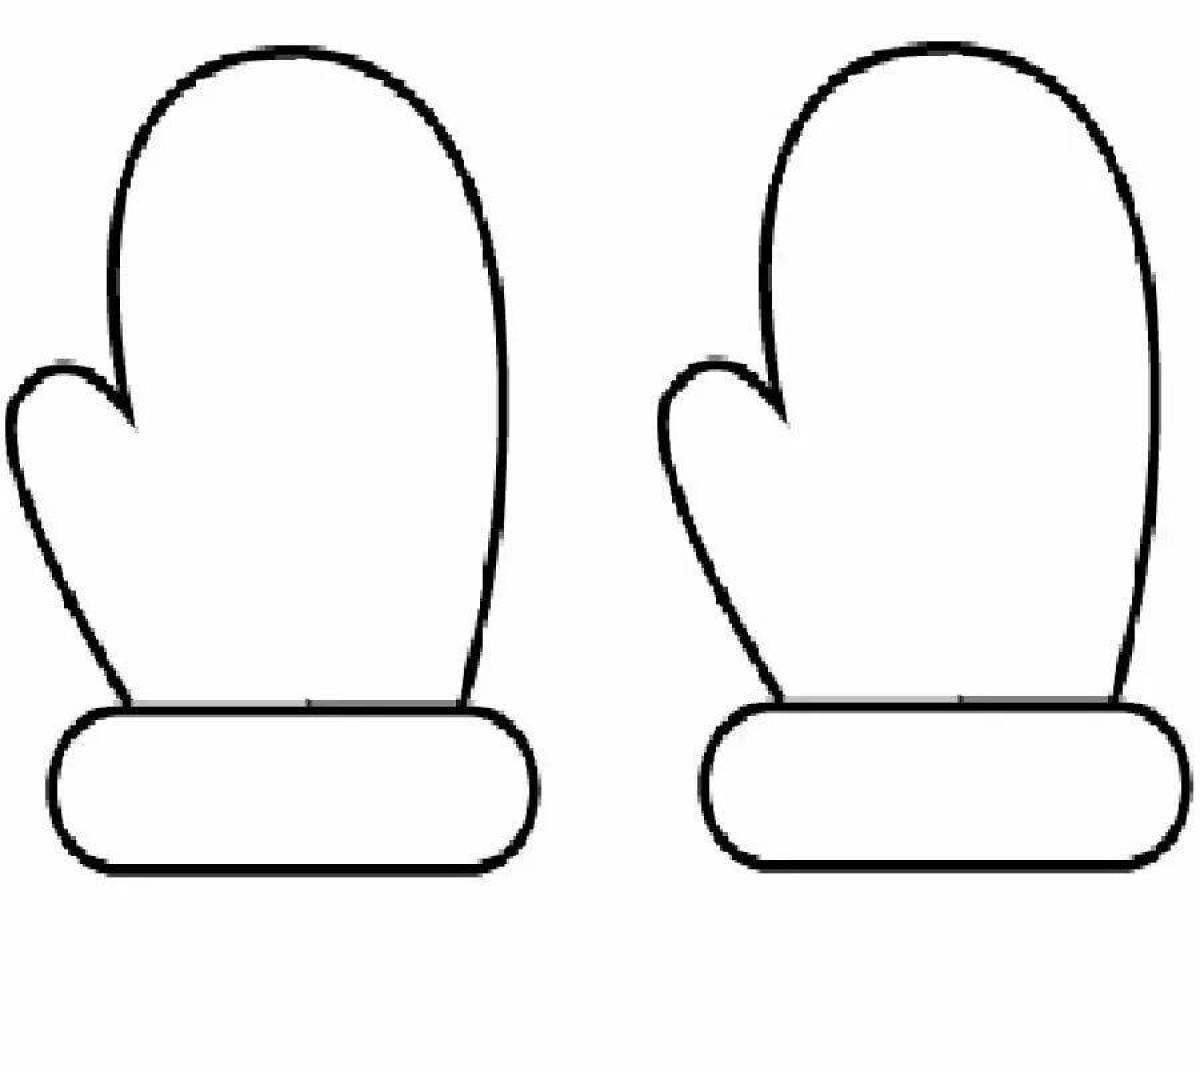 Coloring page attractive pattern of mittens